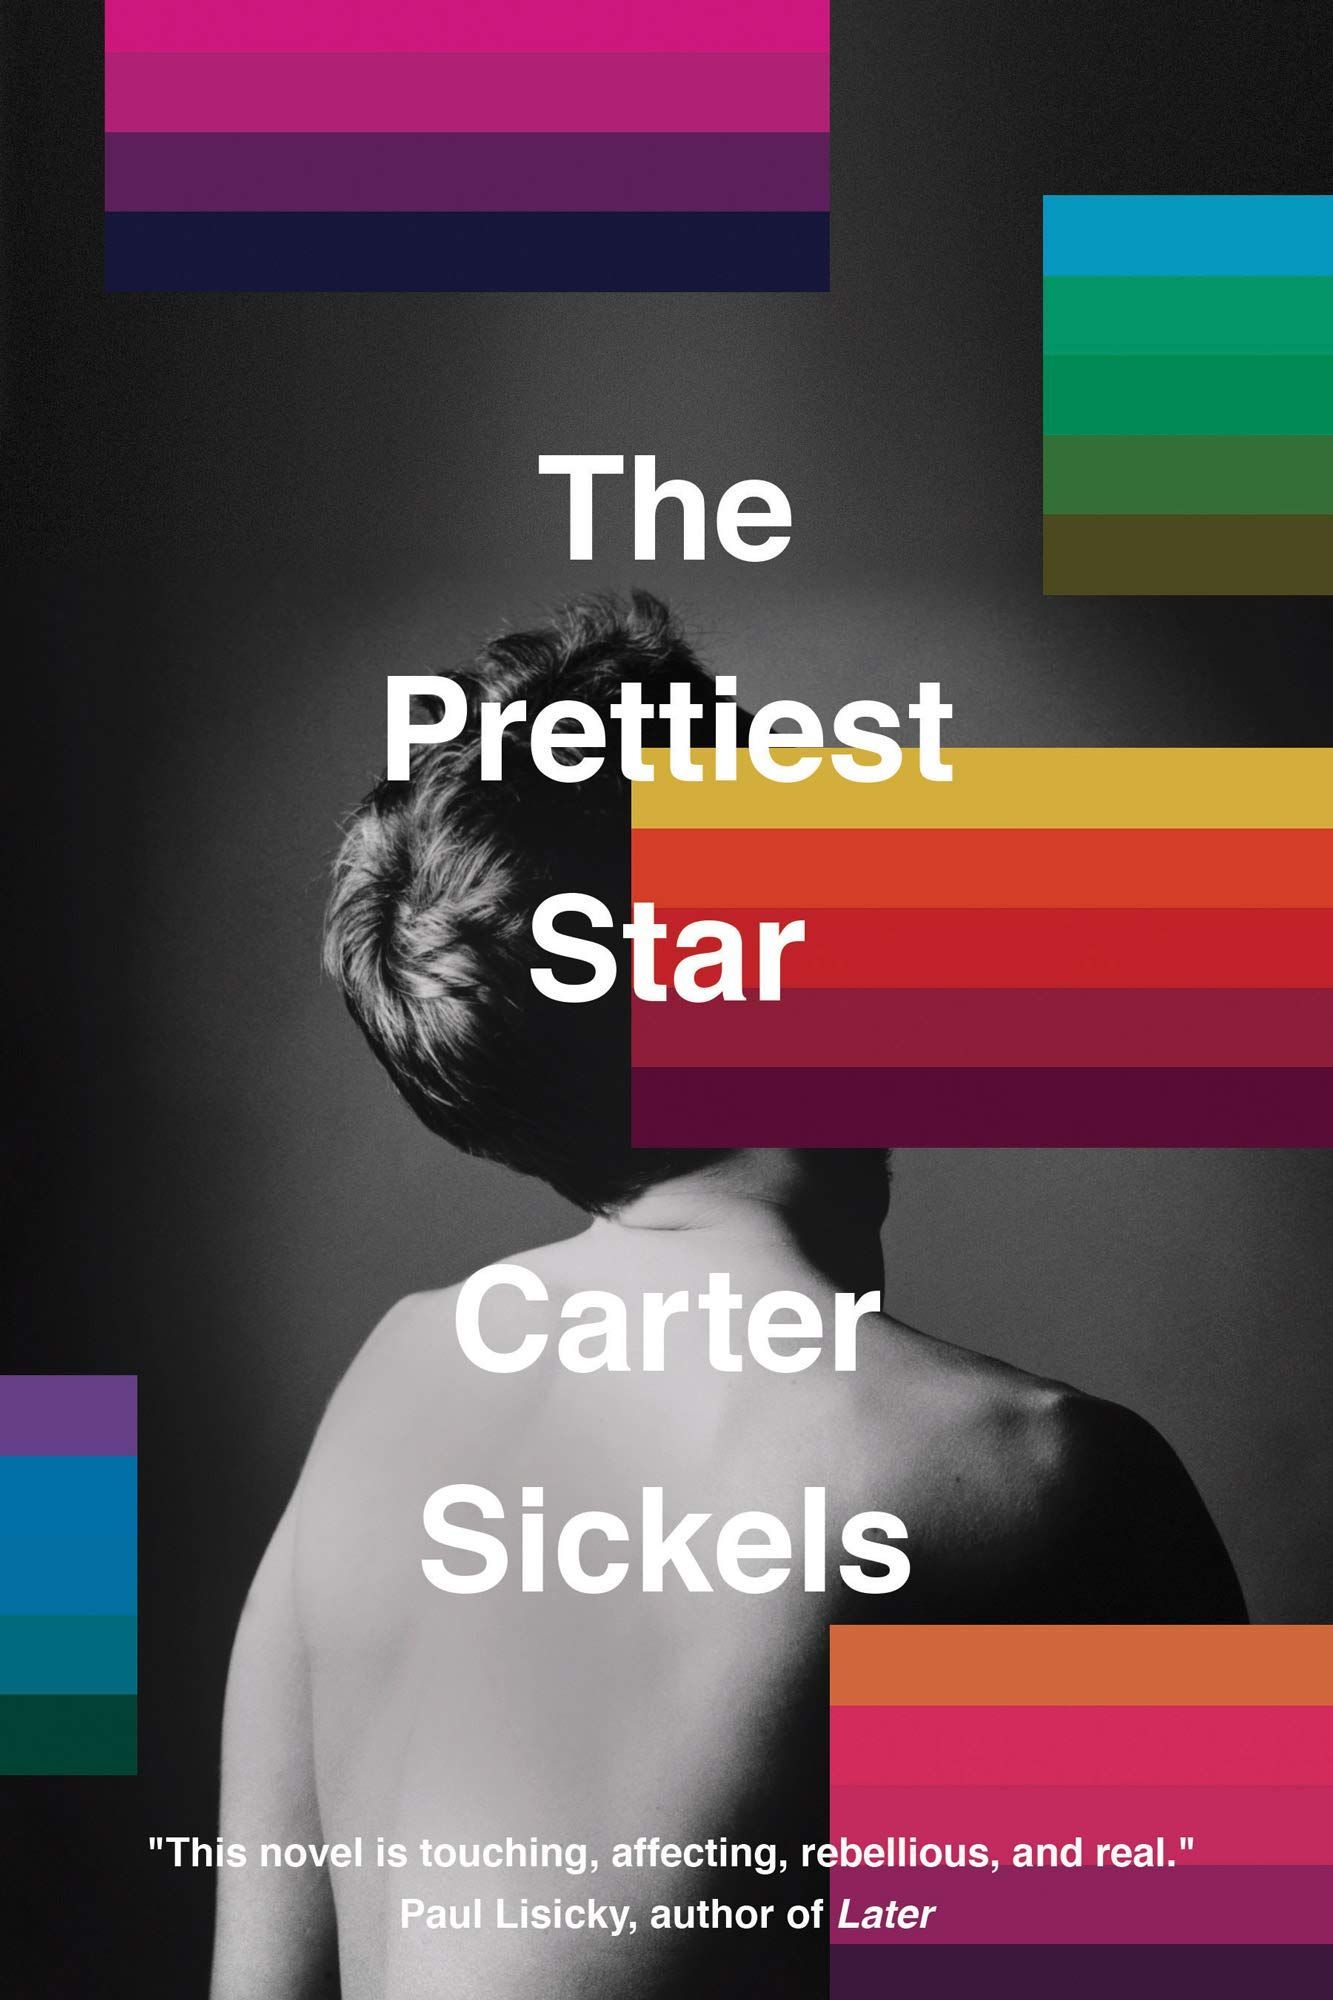 Queer Homecoming: On Carter Sickels’s “The Prettiest Star”